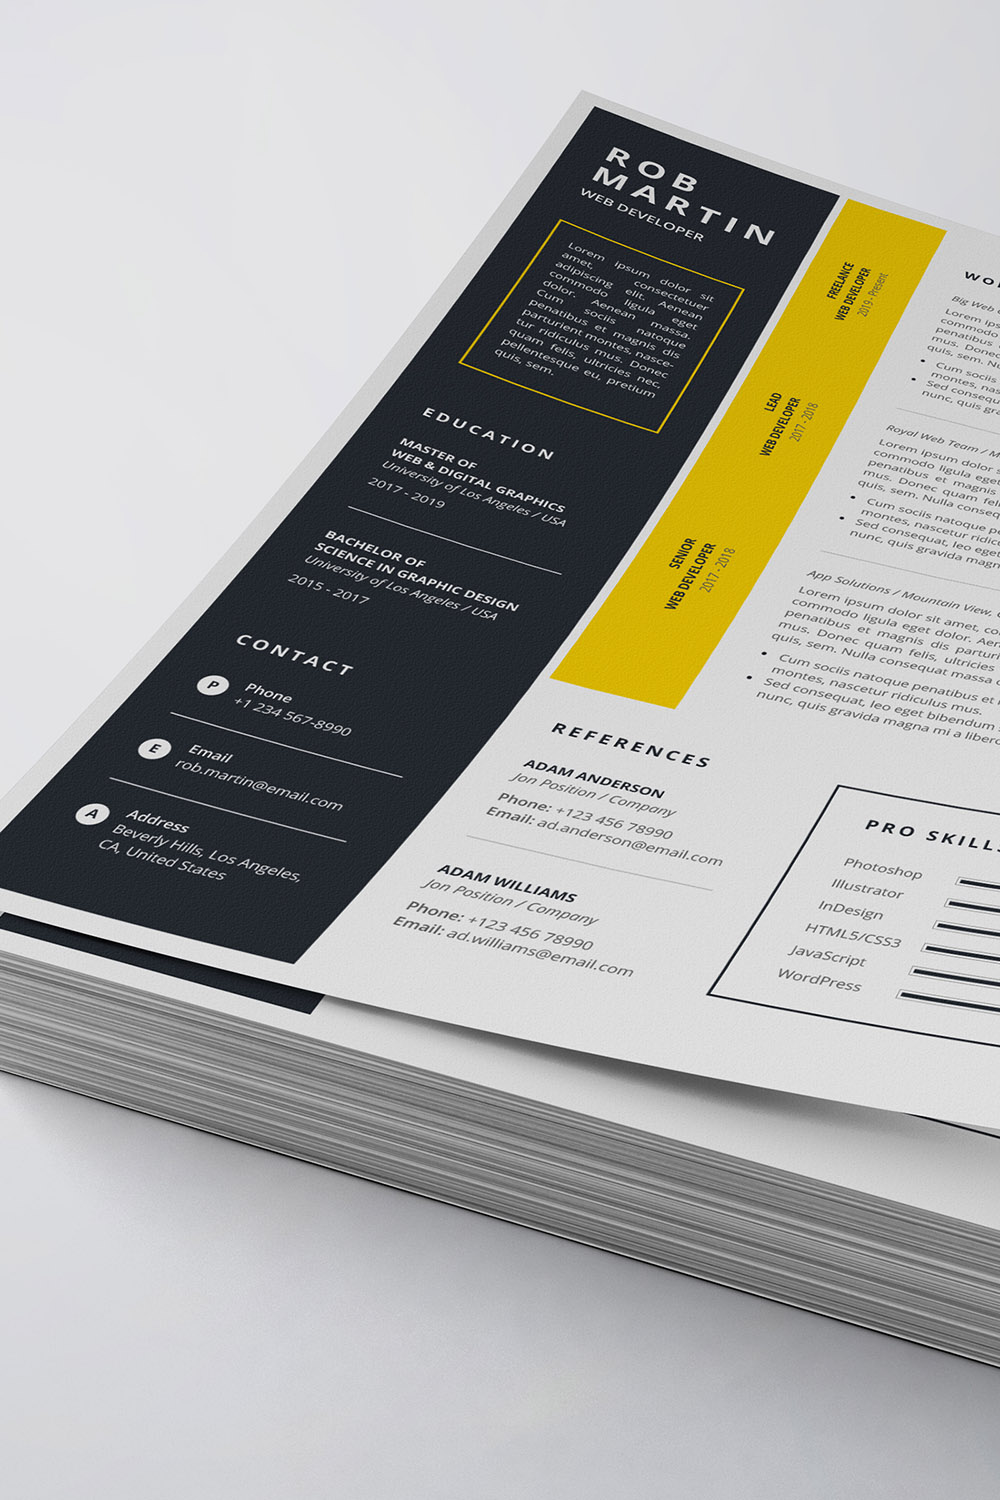 Clean and modern resume template with yellow accents.